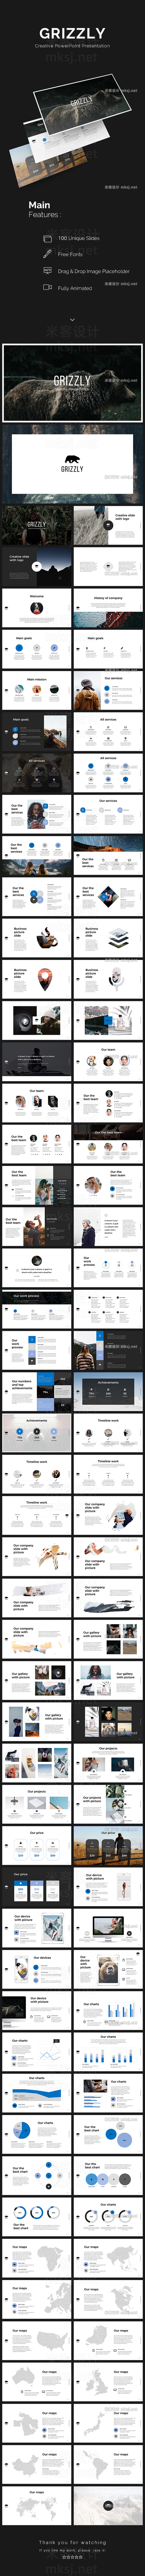 PPT模板 grizzly powerpoint template